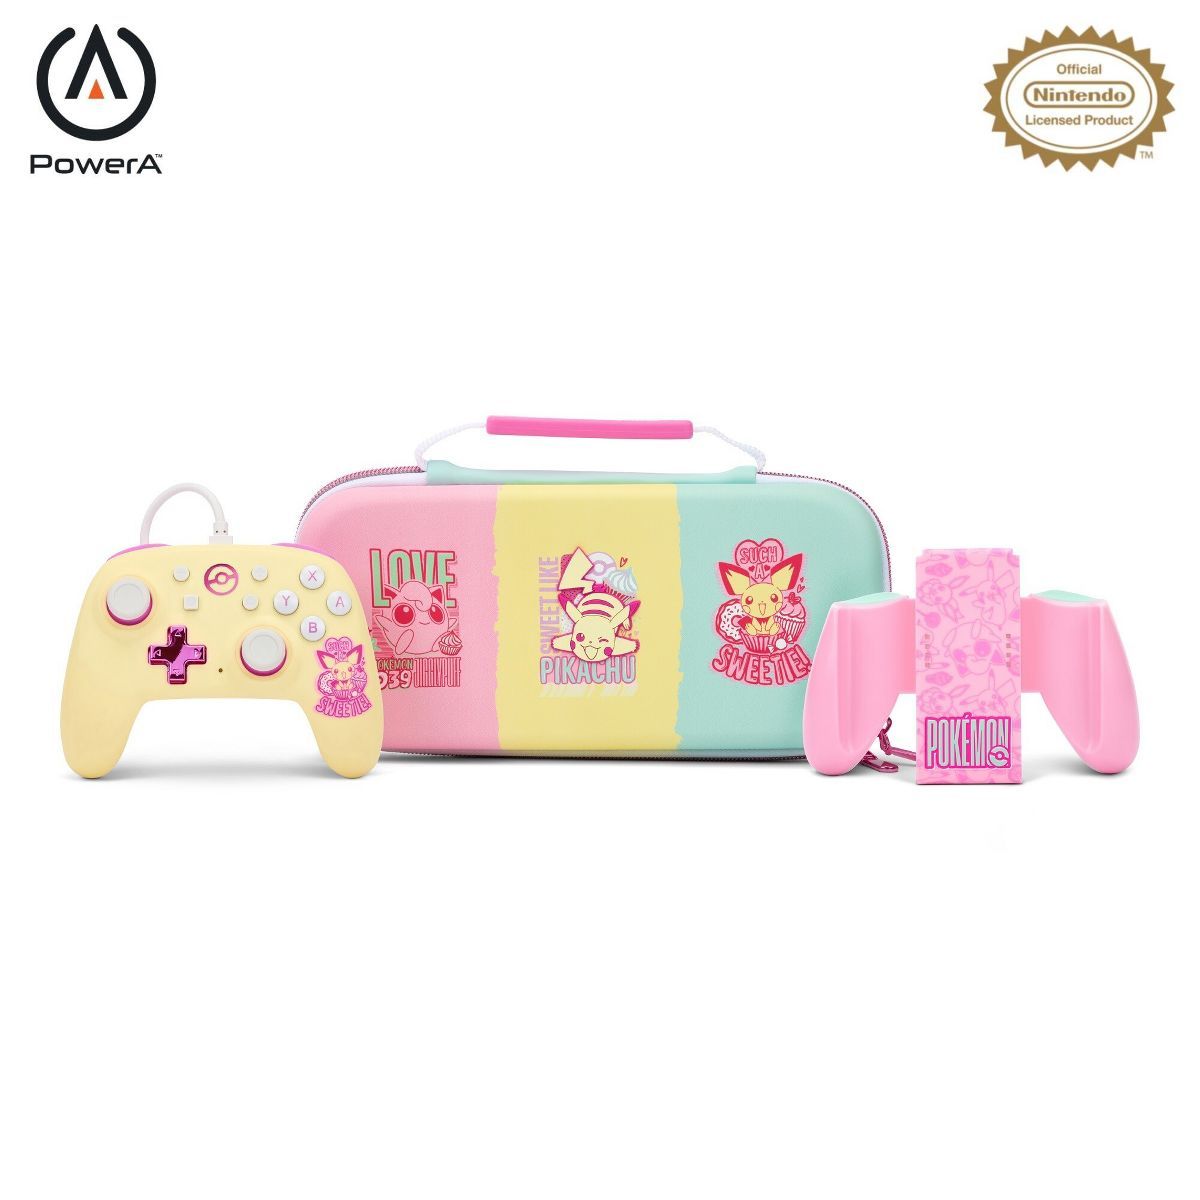 PowerA Nano Wired Controller with Protection Case and Comfort Grips - Pokémon: Sweet Friends | Target